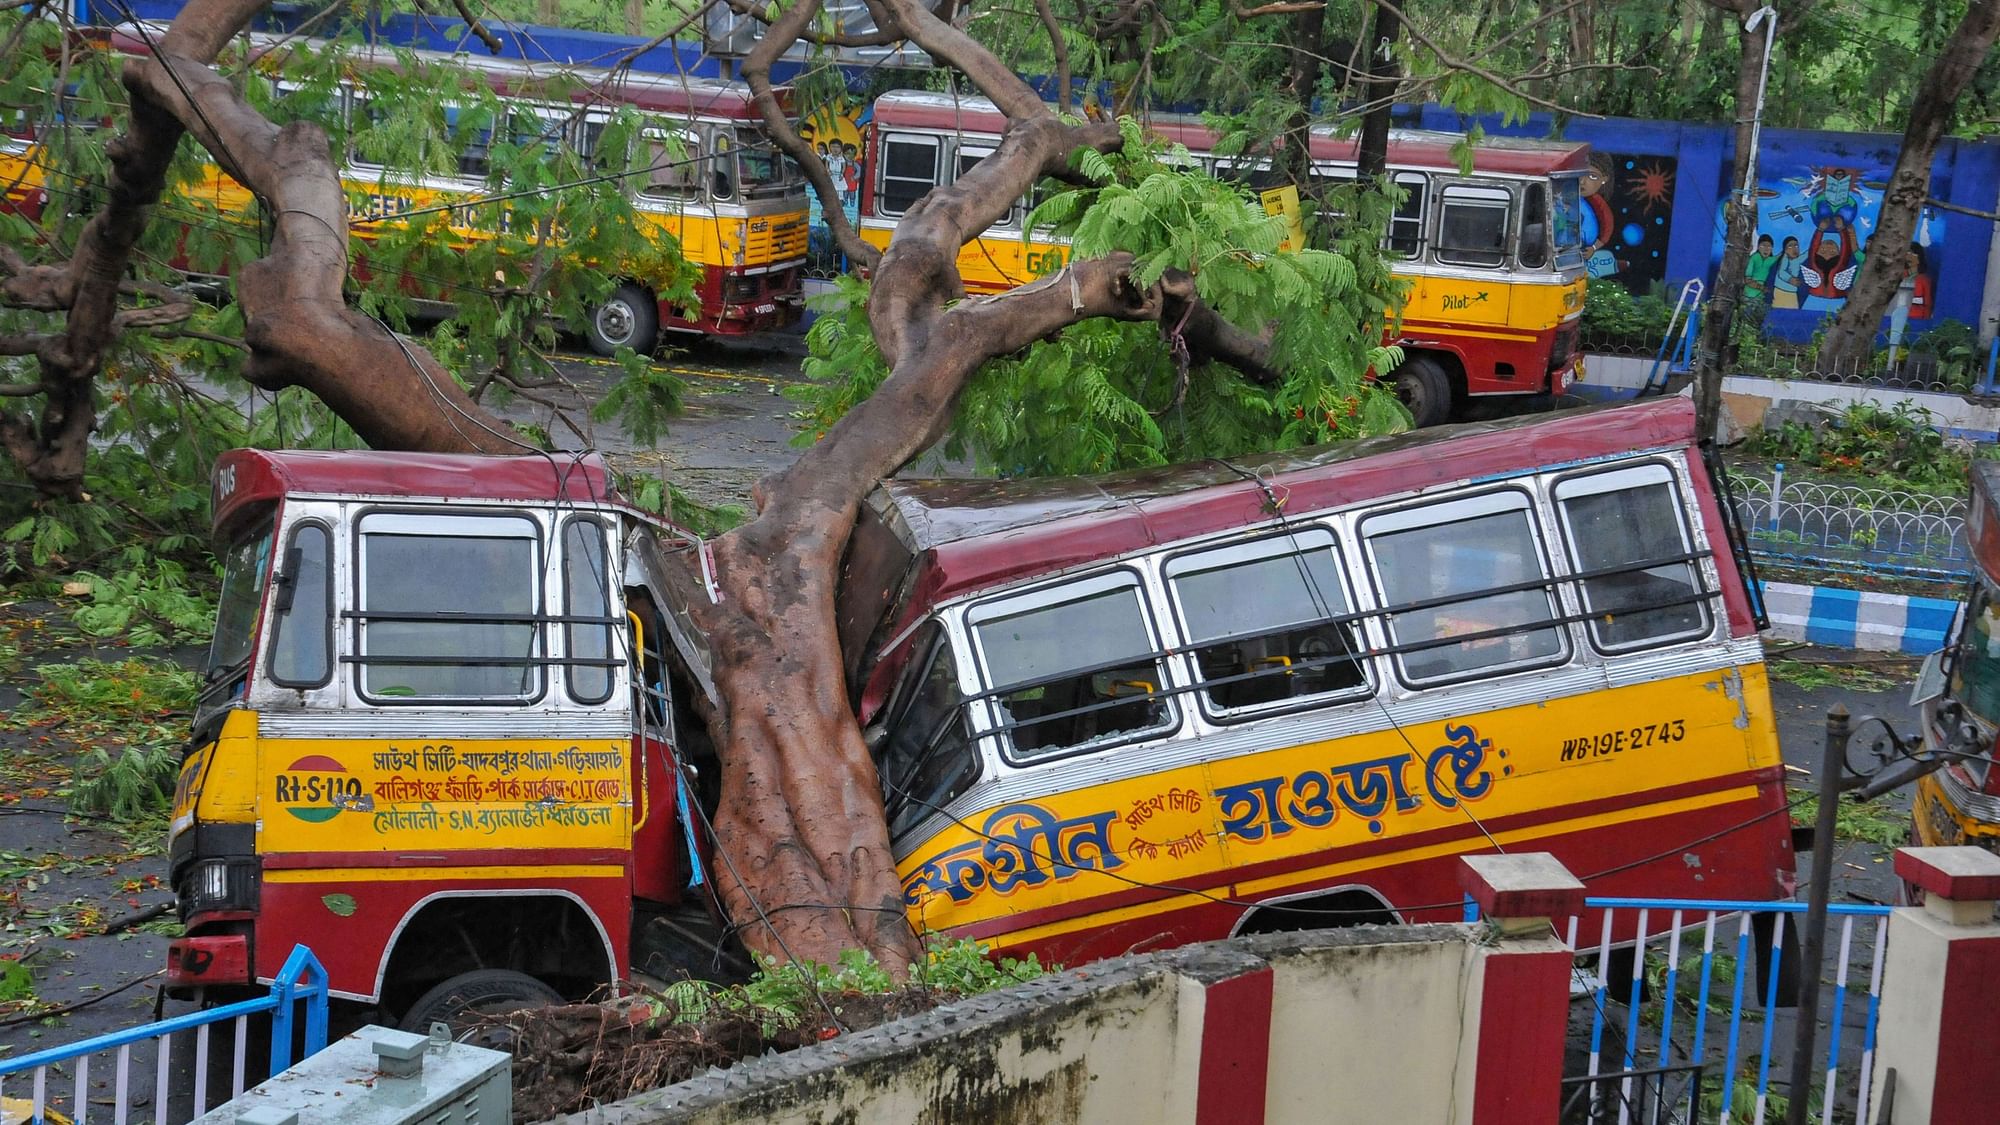 Mangled remains of a bus after a tree fell on it during Cyclone Amphan, in Kolkata, Thursday, May 21. Several other parts of West Bengal wore a battered look after the extremely severe cyclone Amphan ripped through the state, leaving at least 72 people dead.